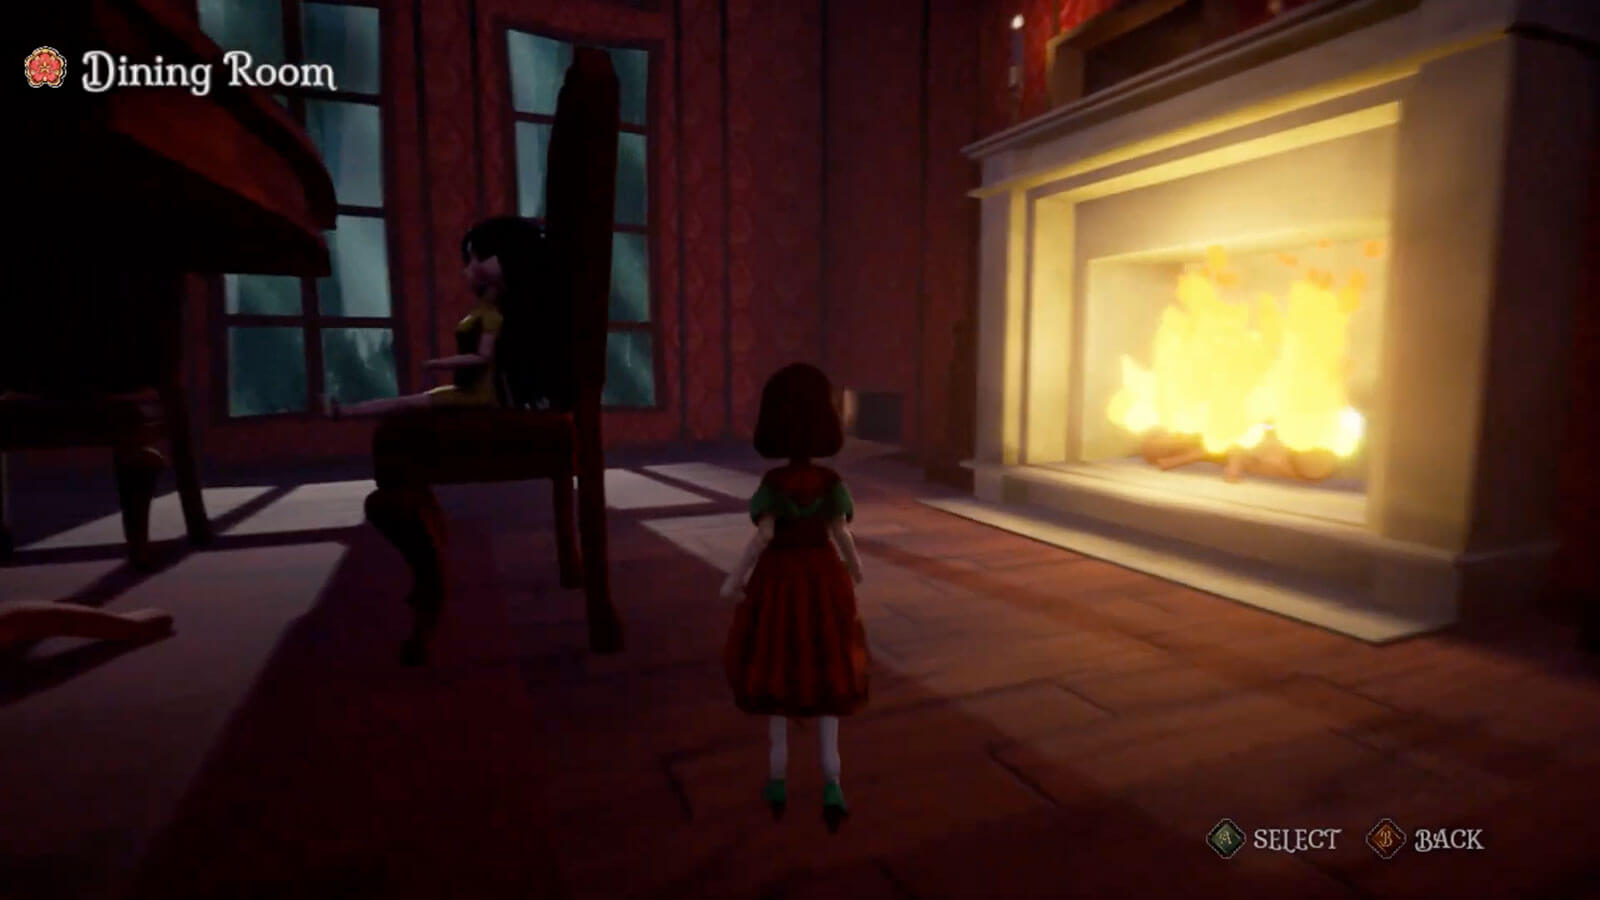 Porcelain doll stands next to a burning fireplace